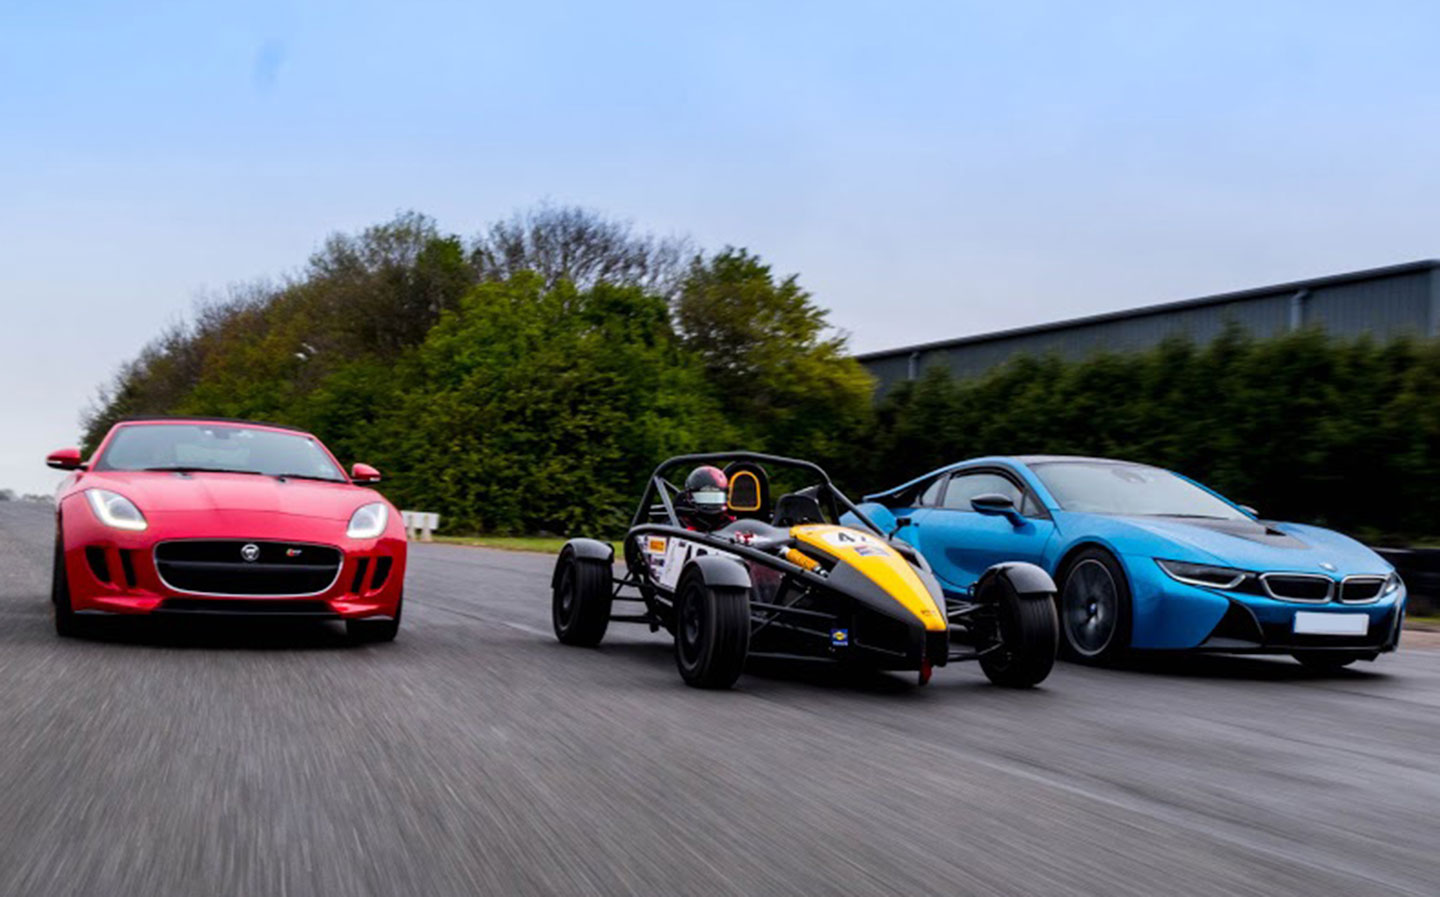 Win a supercar experience